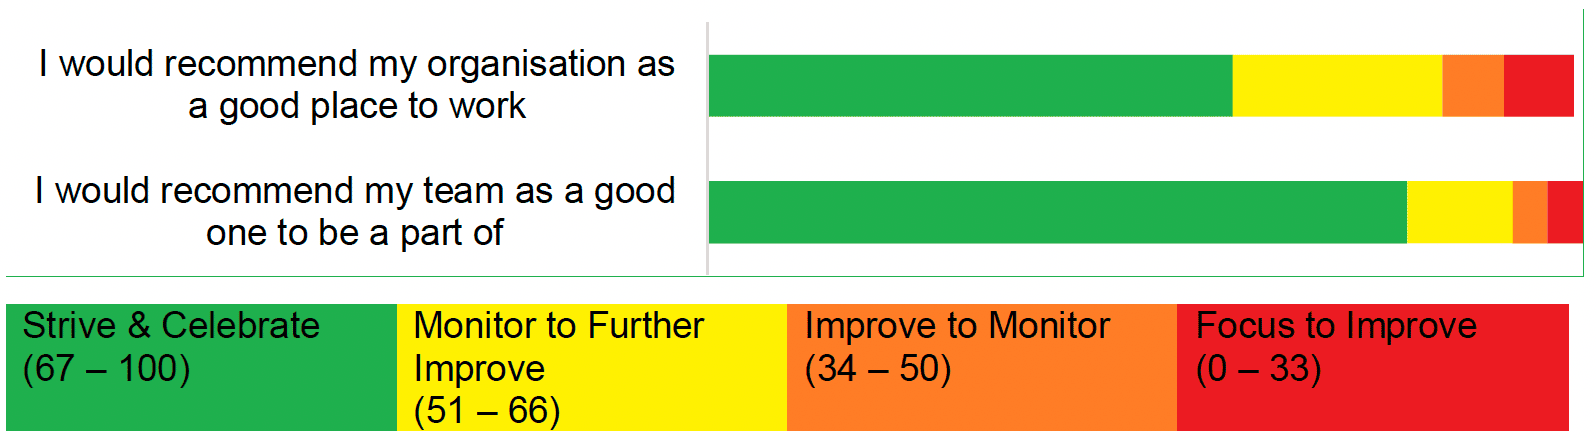 Bar chart showing score distribution for recommendation scores which are detailed in the table following the chart.